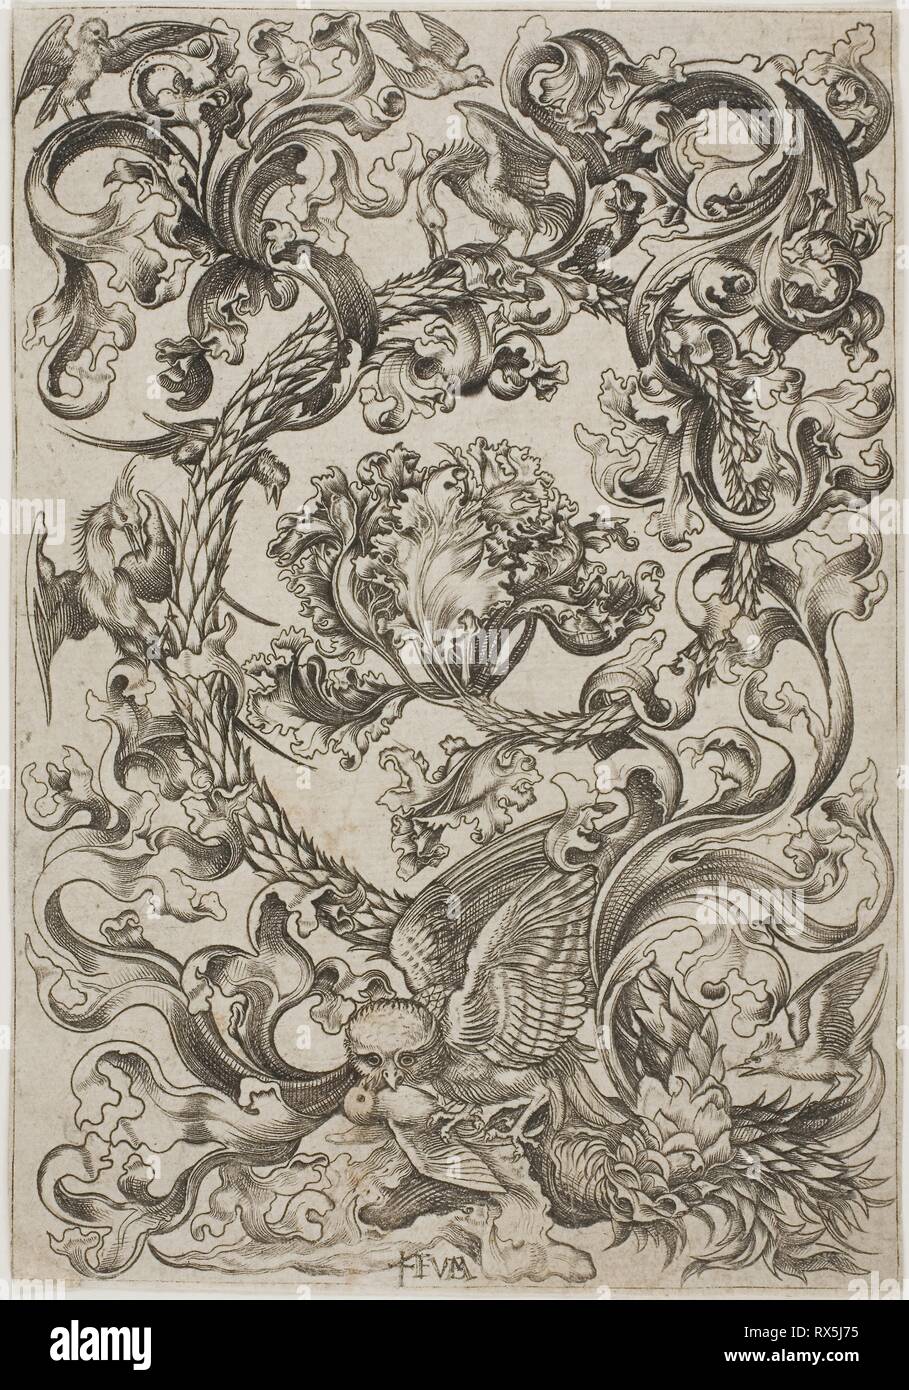 Ornament with Owl Mocked by Day Birds. Master F.V.B. (Netherlandish, active 1475-1500); after Martin Schongauer (German, c. 1450-1491). Date: 1475-1485. Dimensions: 149 x 98 mm (image/plate); 142 x 100 mm (sheet). Engraving on cream laid paper. Origin: Netherlands. Museum: The Chicago Art Institute. Stock Photo